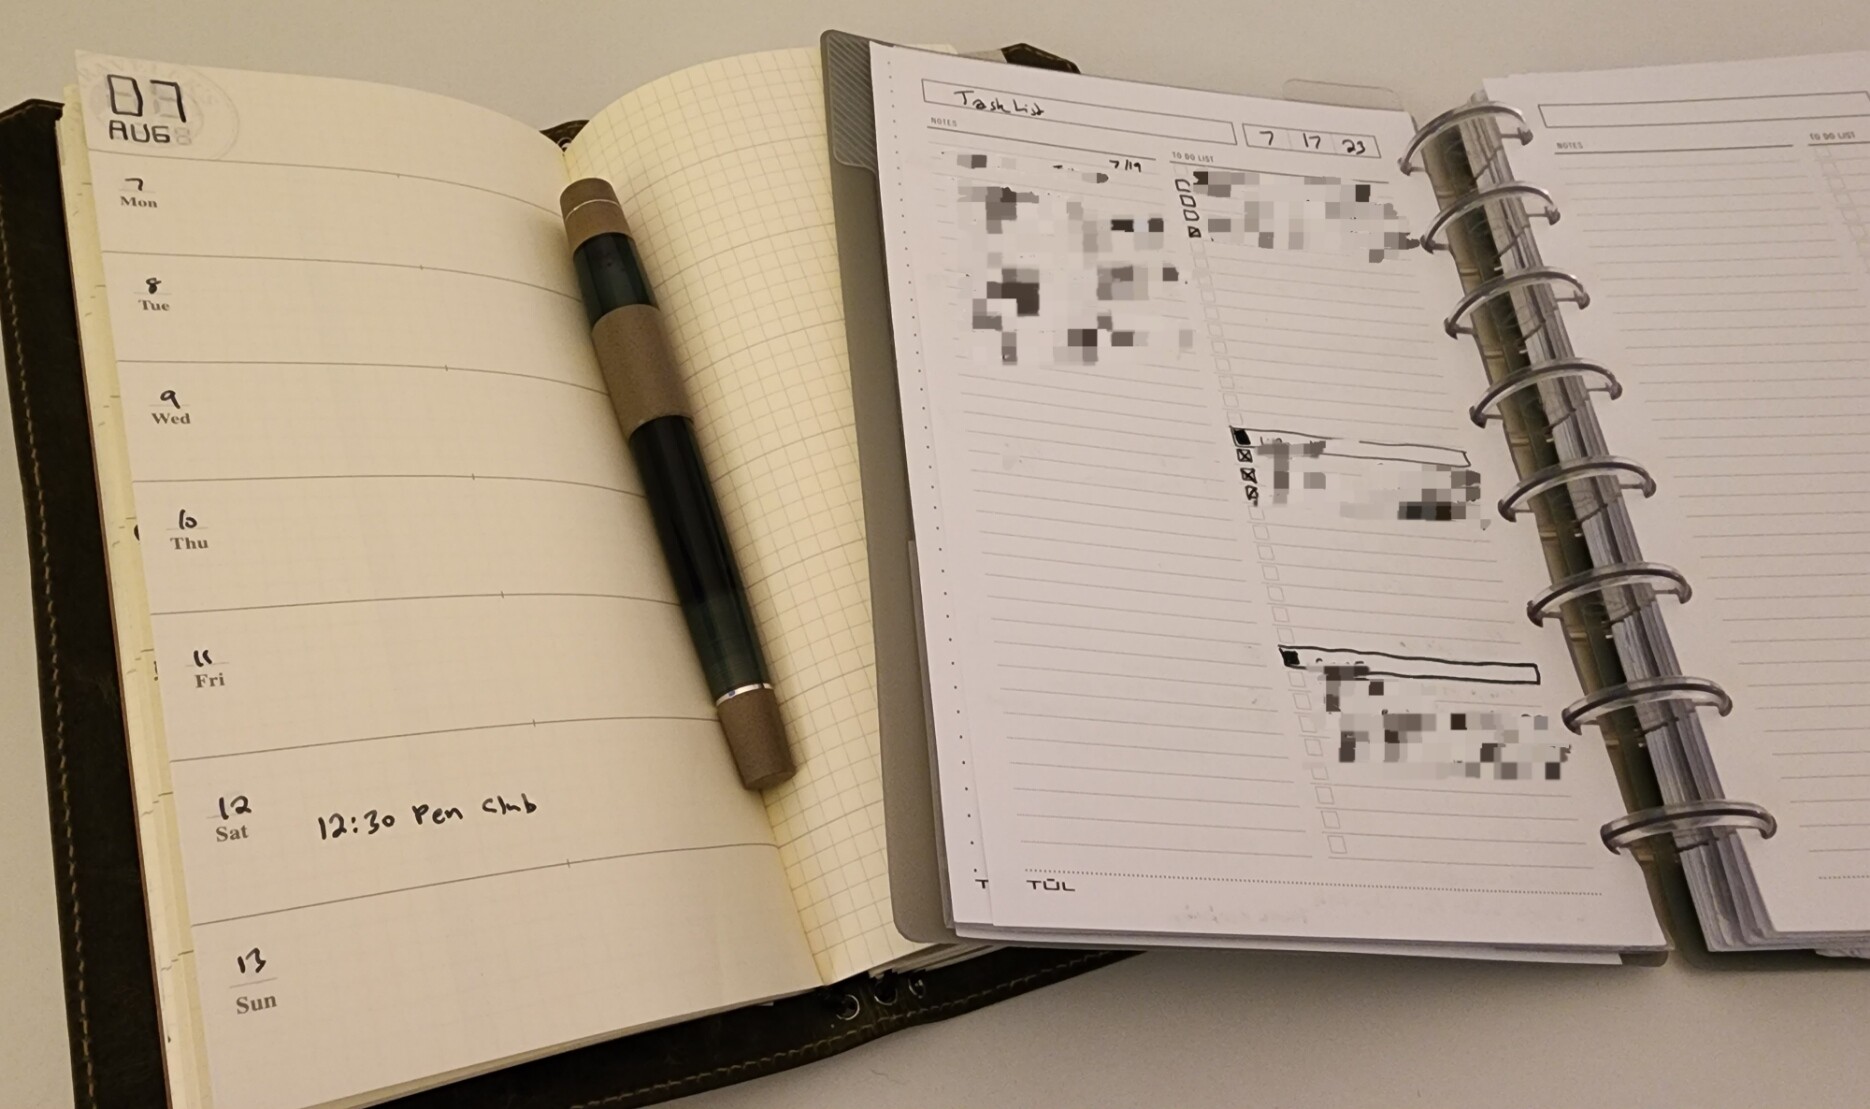 Future/redacted examples of the Traveler's weekly planner layout (017) in a Franklin-Christoph cover and a TUL discbound notebook with notes/to-do layout.